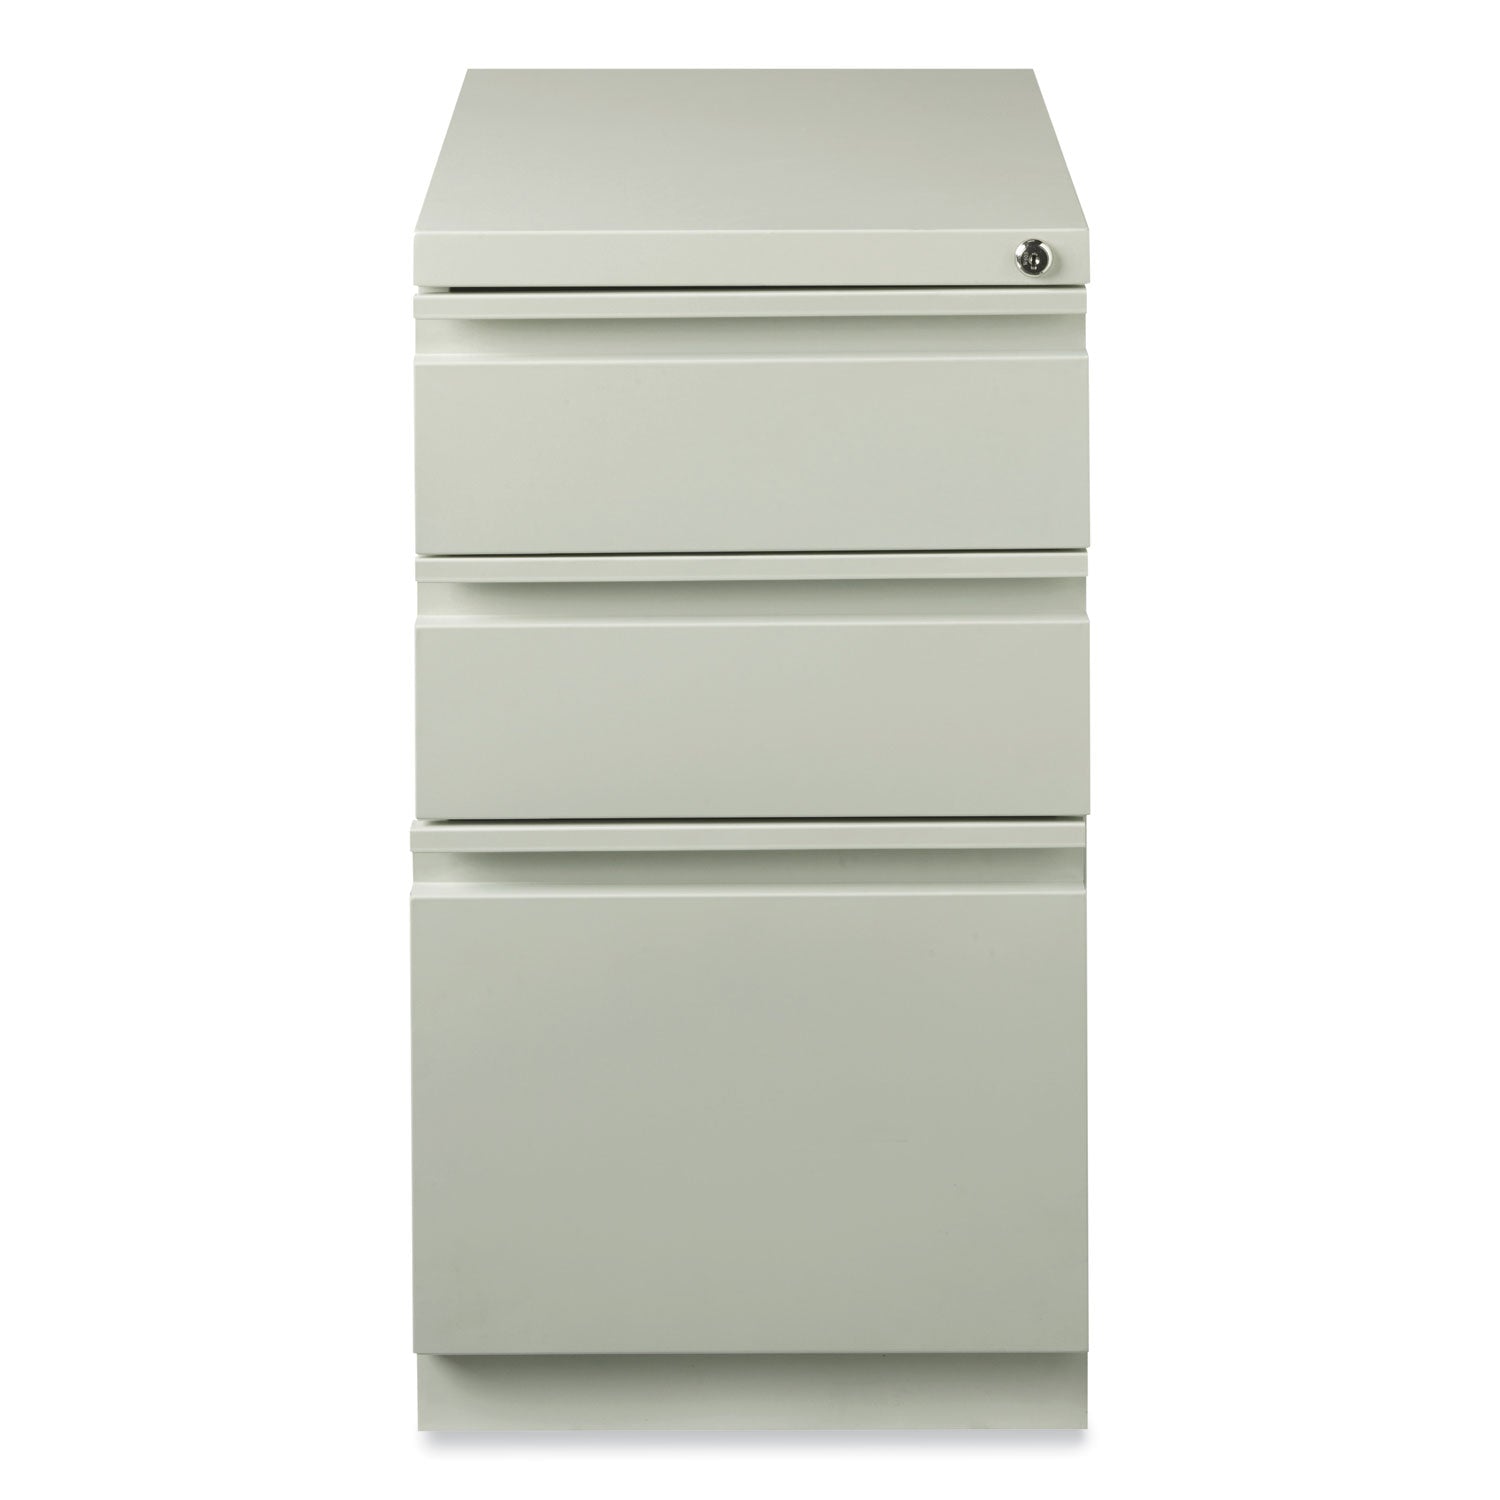 full-width-pull-20-deep-mobile-pedestal-file-box-box-file-letter-lt-gray-15-x-1988-x-2775-ships-in-4-6-business-days_hid18576 - 3